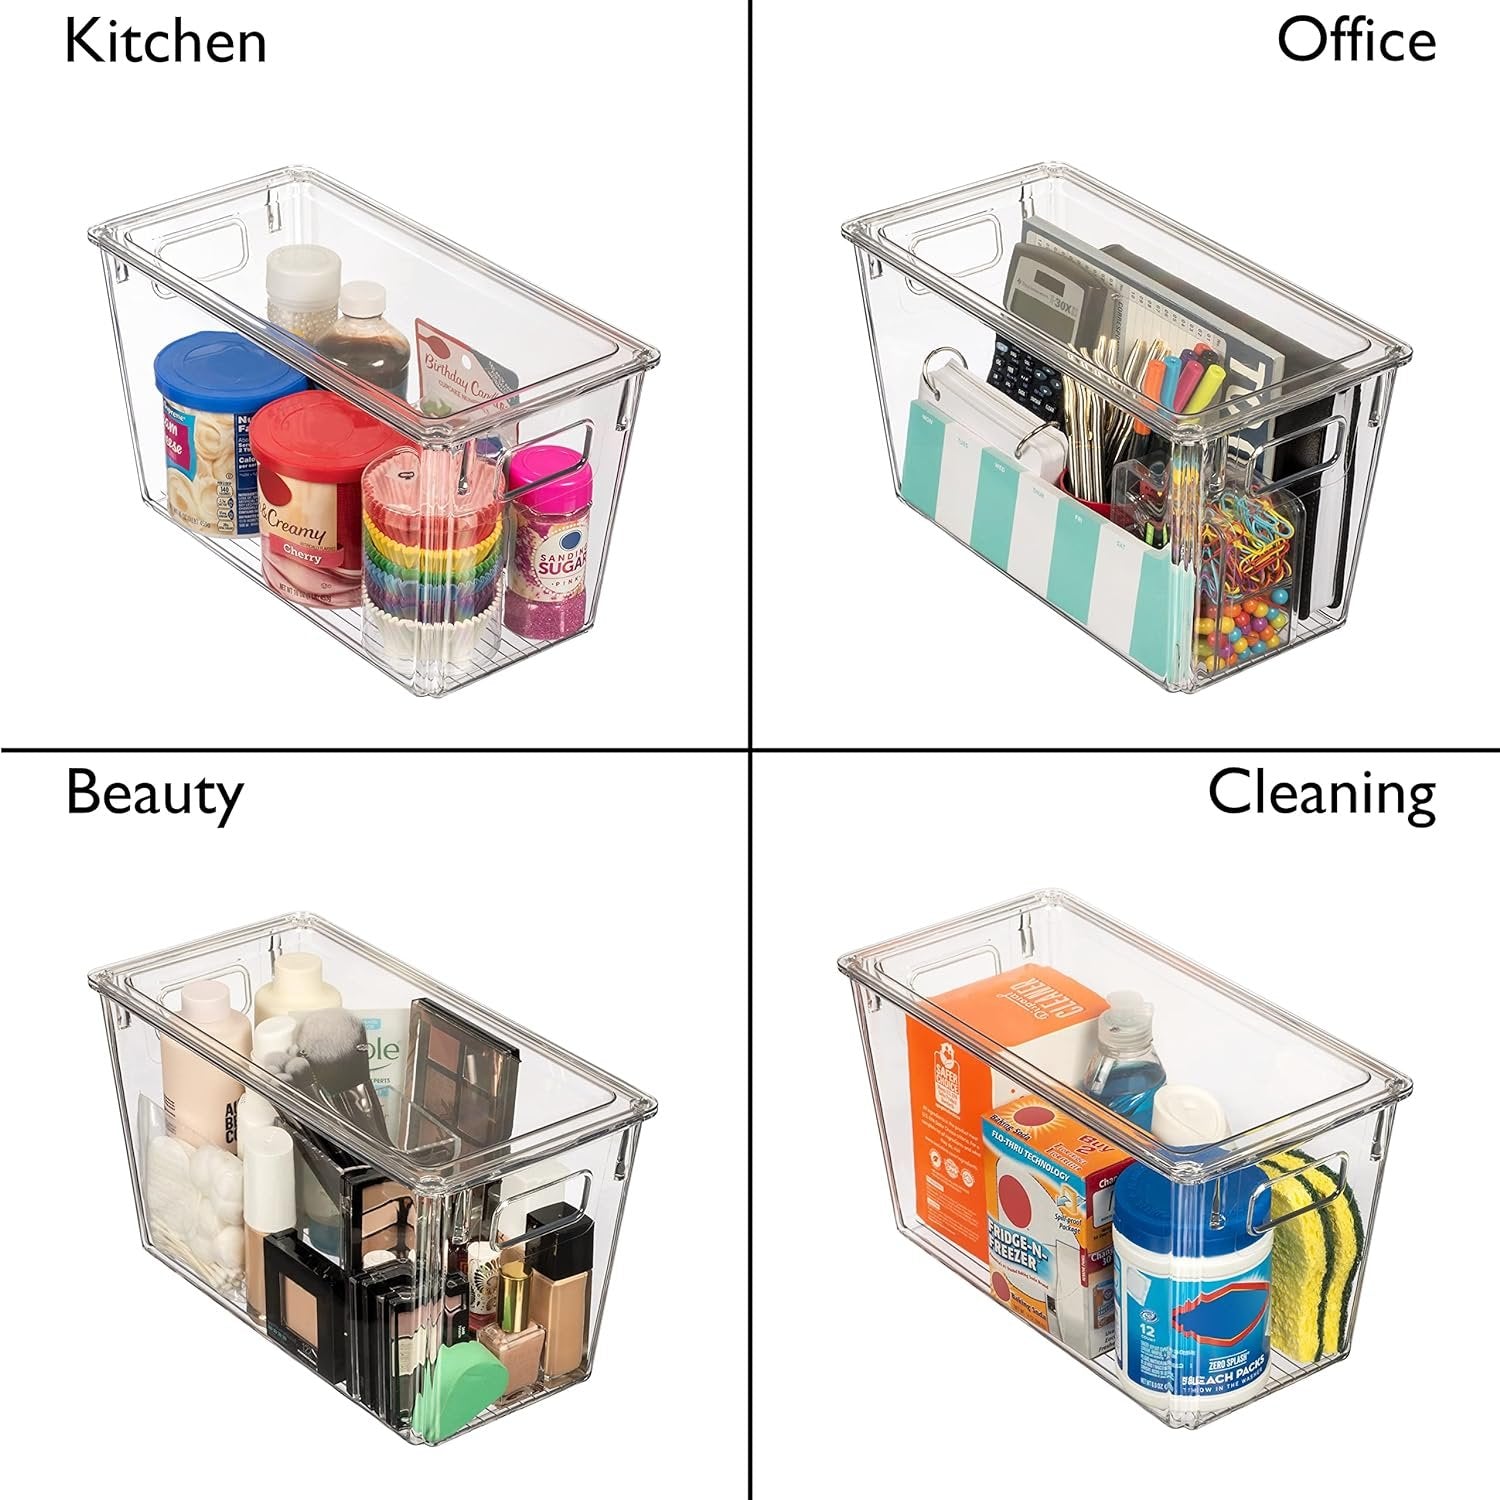 ClearSpace Plastic Storage Bins with Lids – Perfect Kitchen Organization or Pantry Fridge Organizer, and Bins, Cabinet Organizers